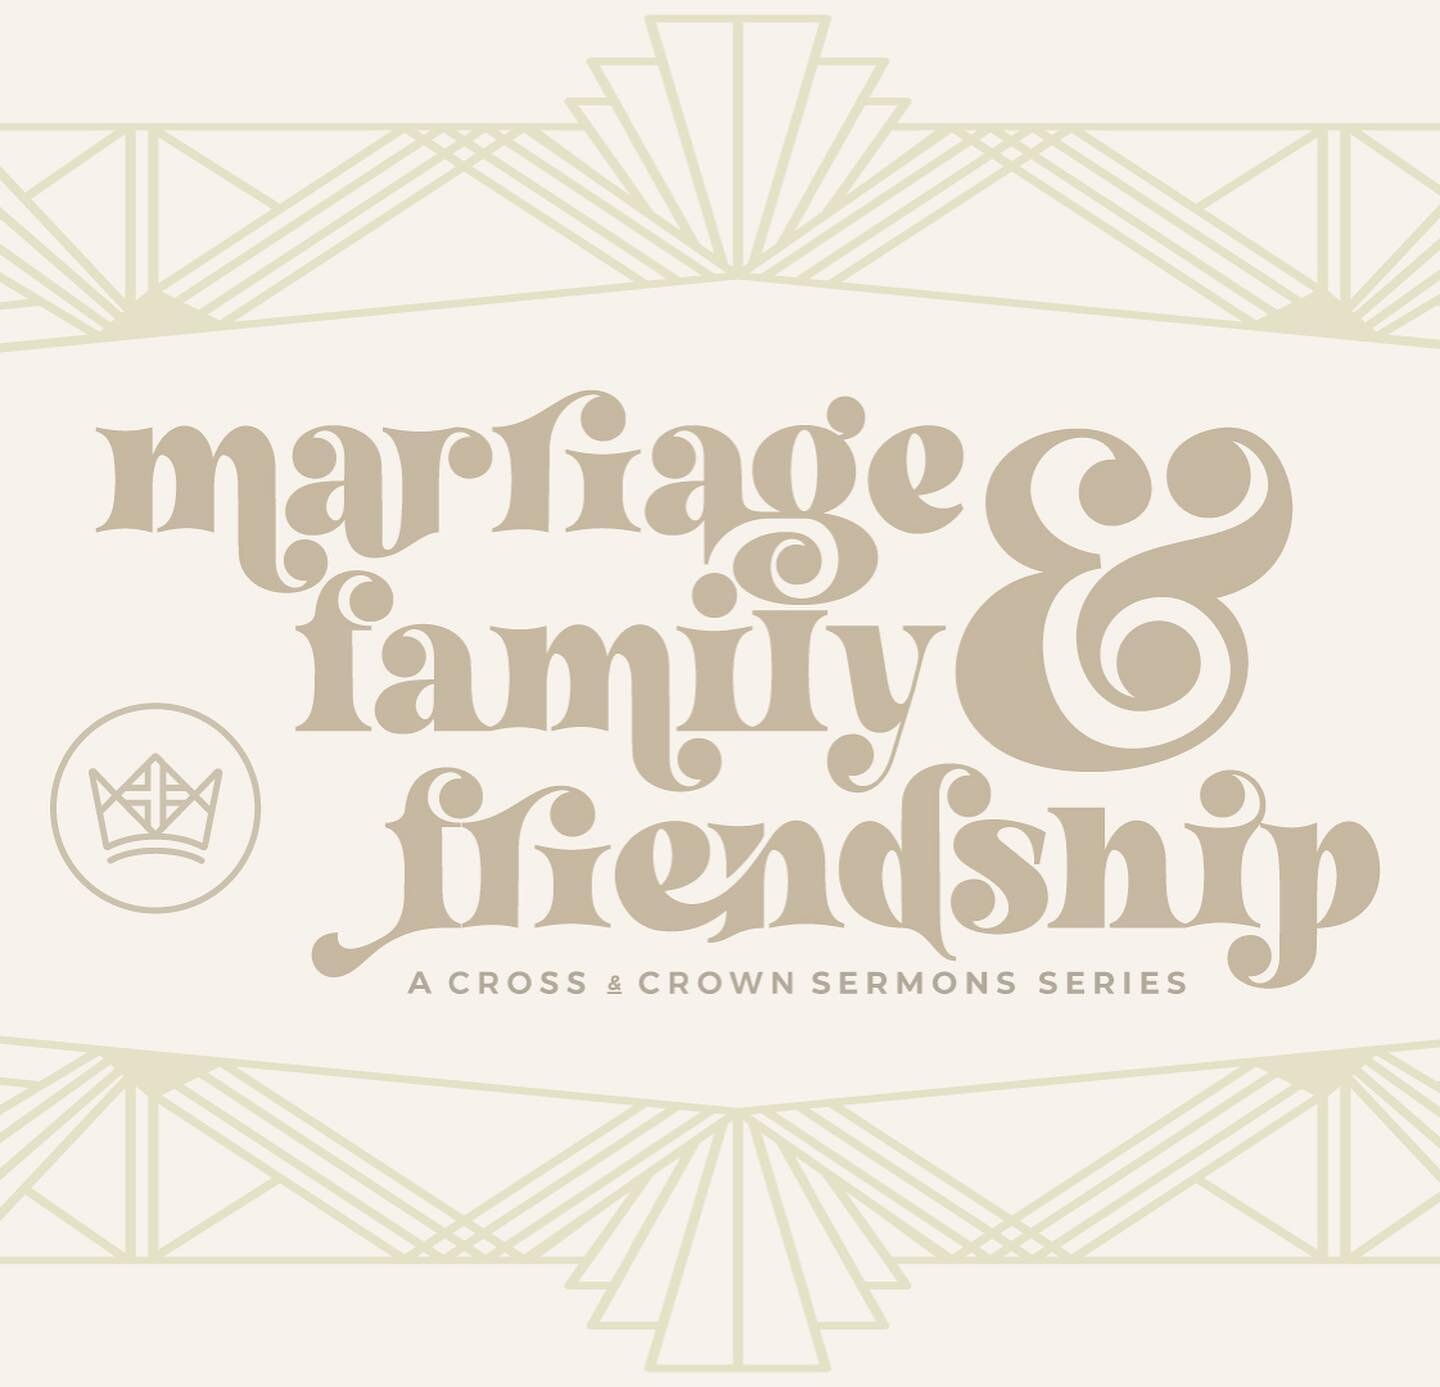 Today we start a three week series about marriage, family, and friendship. Did you miss todays sermon or want to hear past sermons? Listen on Apple Podcasts! #churchplant #church #namb #sendnetwork #namb_sbc #missionfield #applepodcast #churchesplant